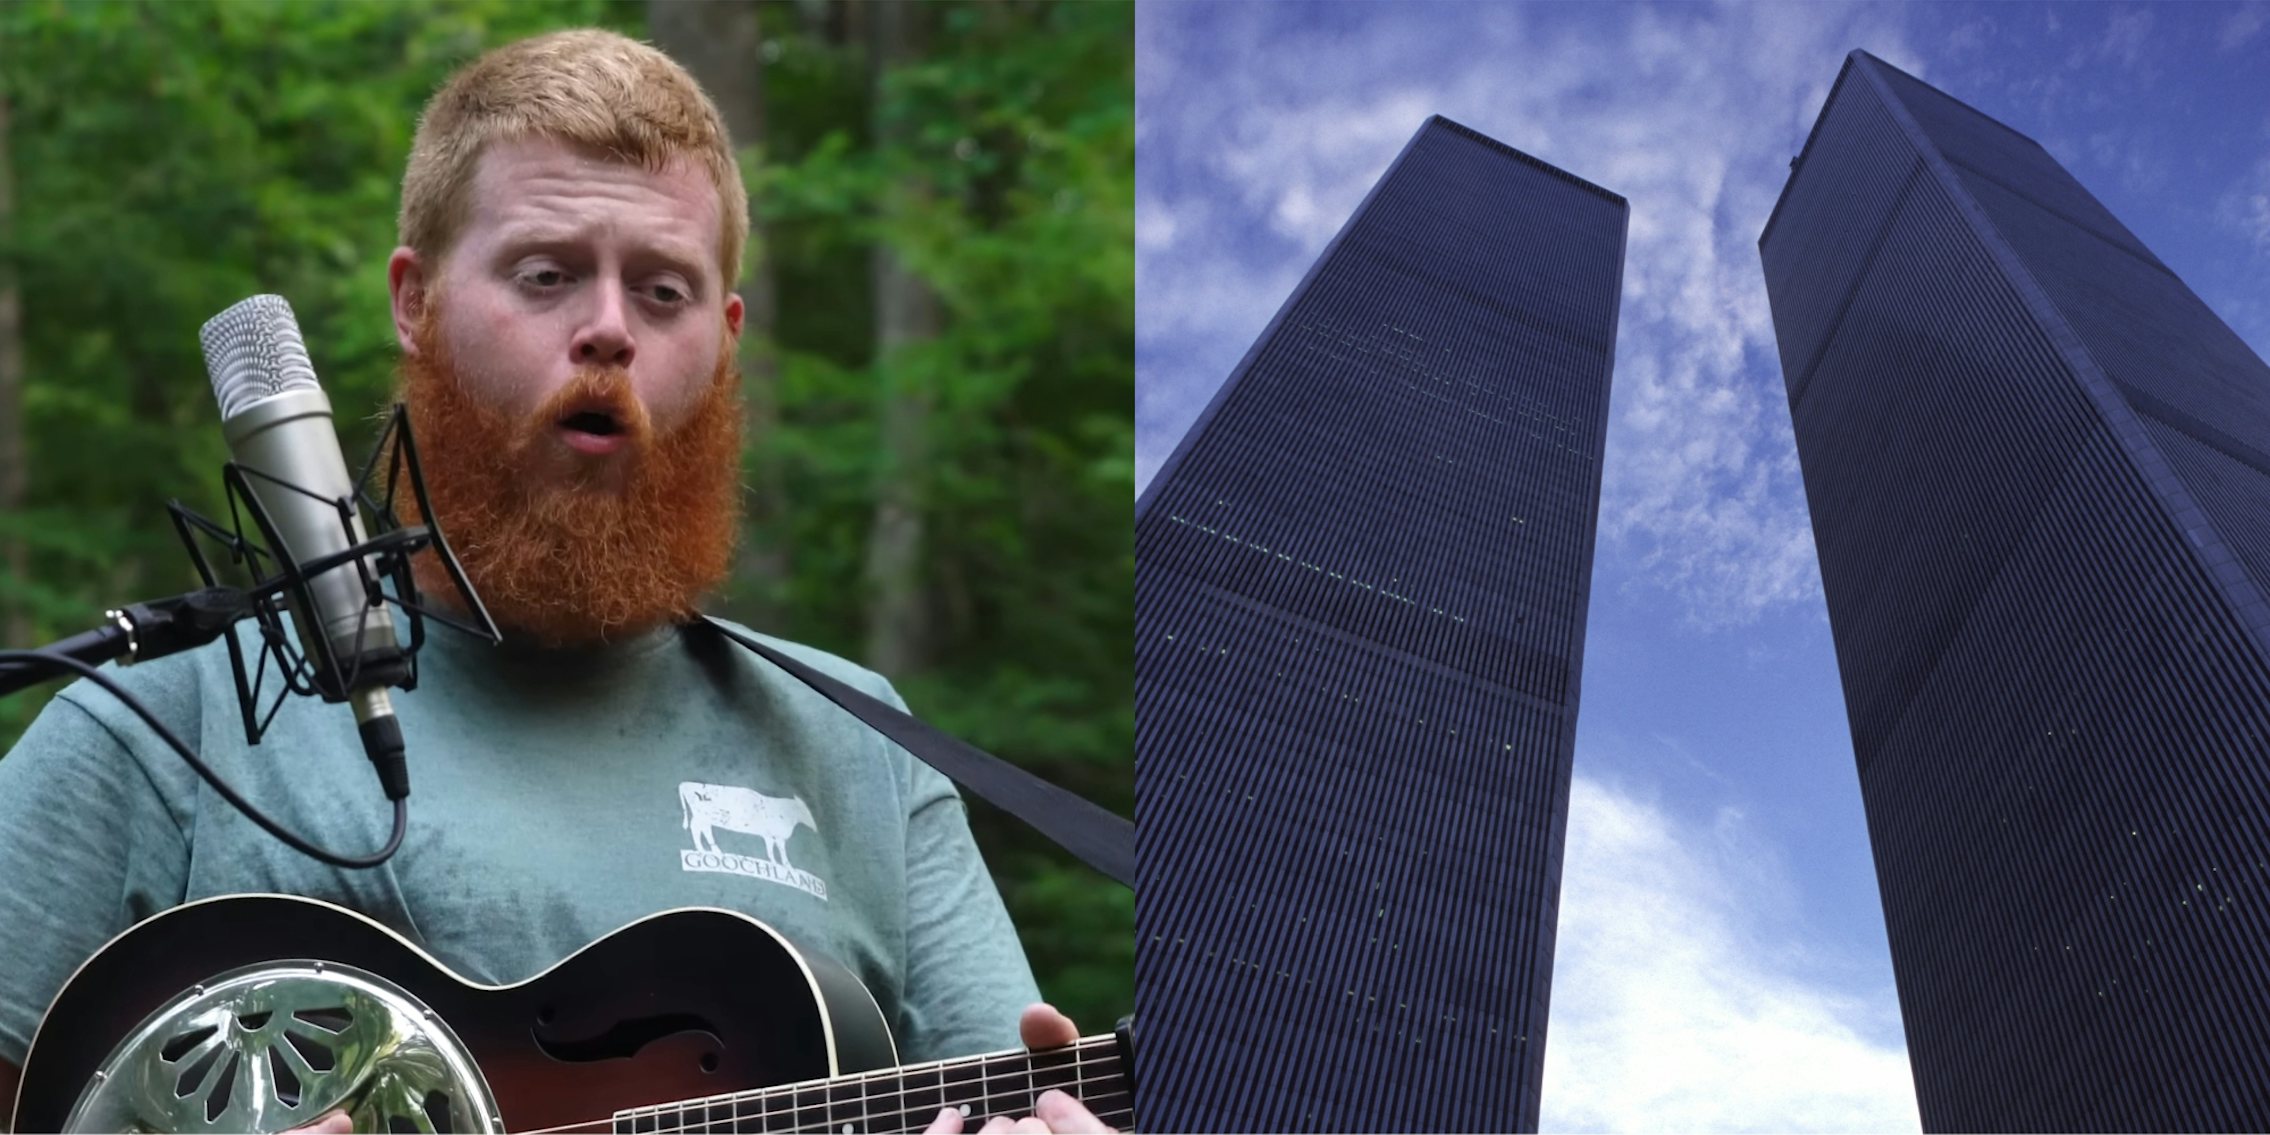 Oliver Anthony singing into microphone outside (c) World Trade Center towers with blue sky (r)